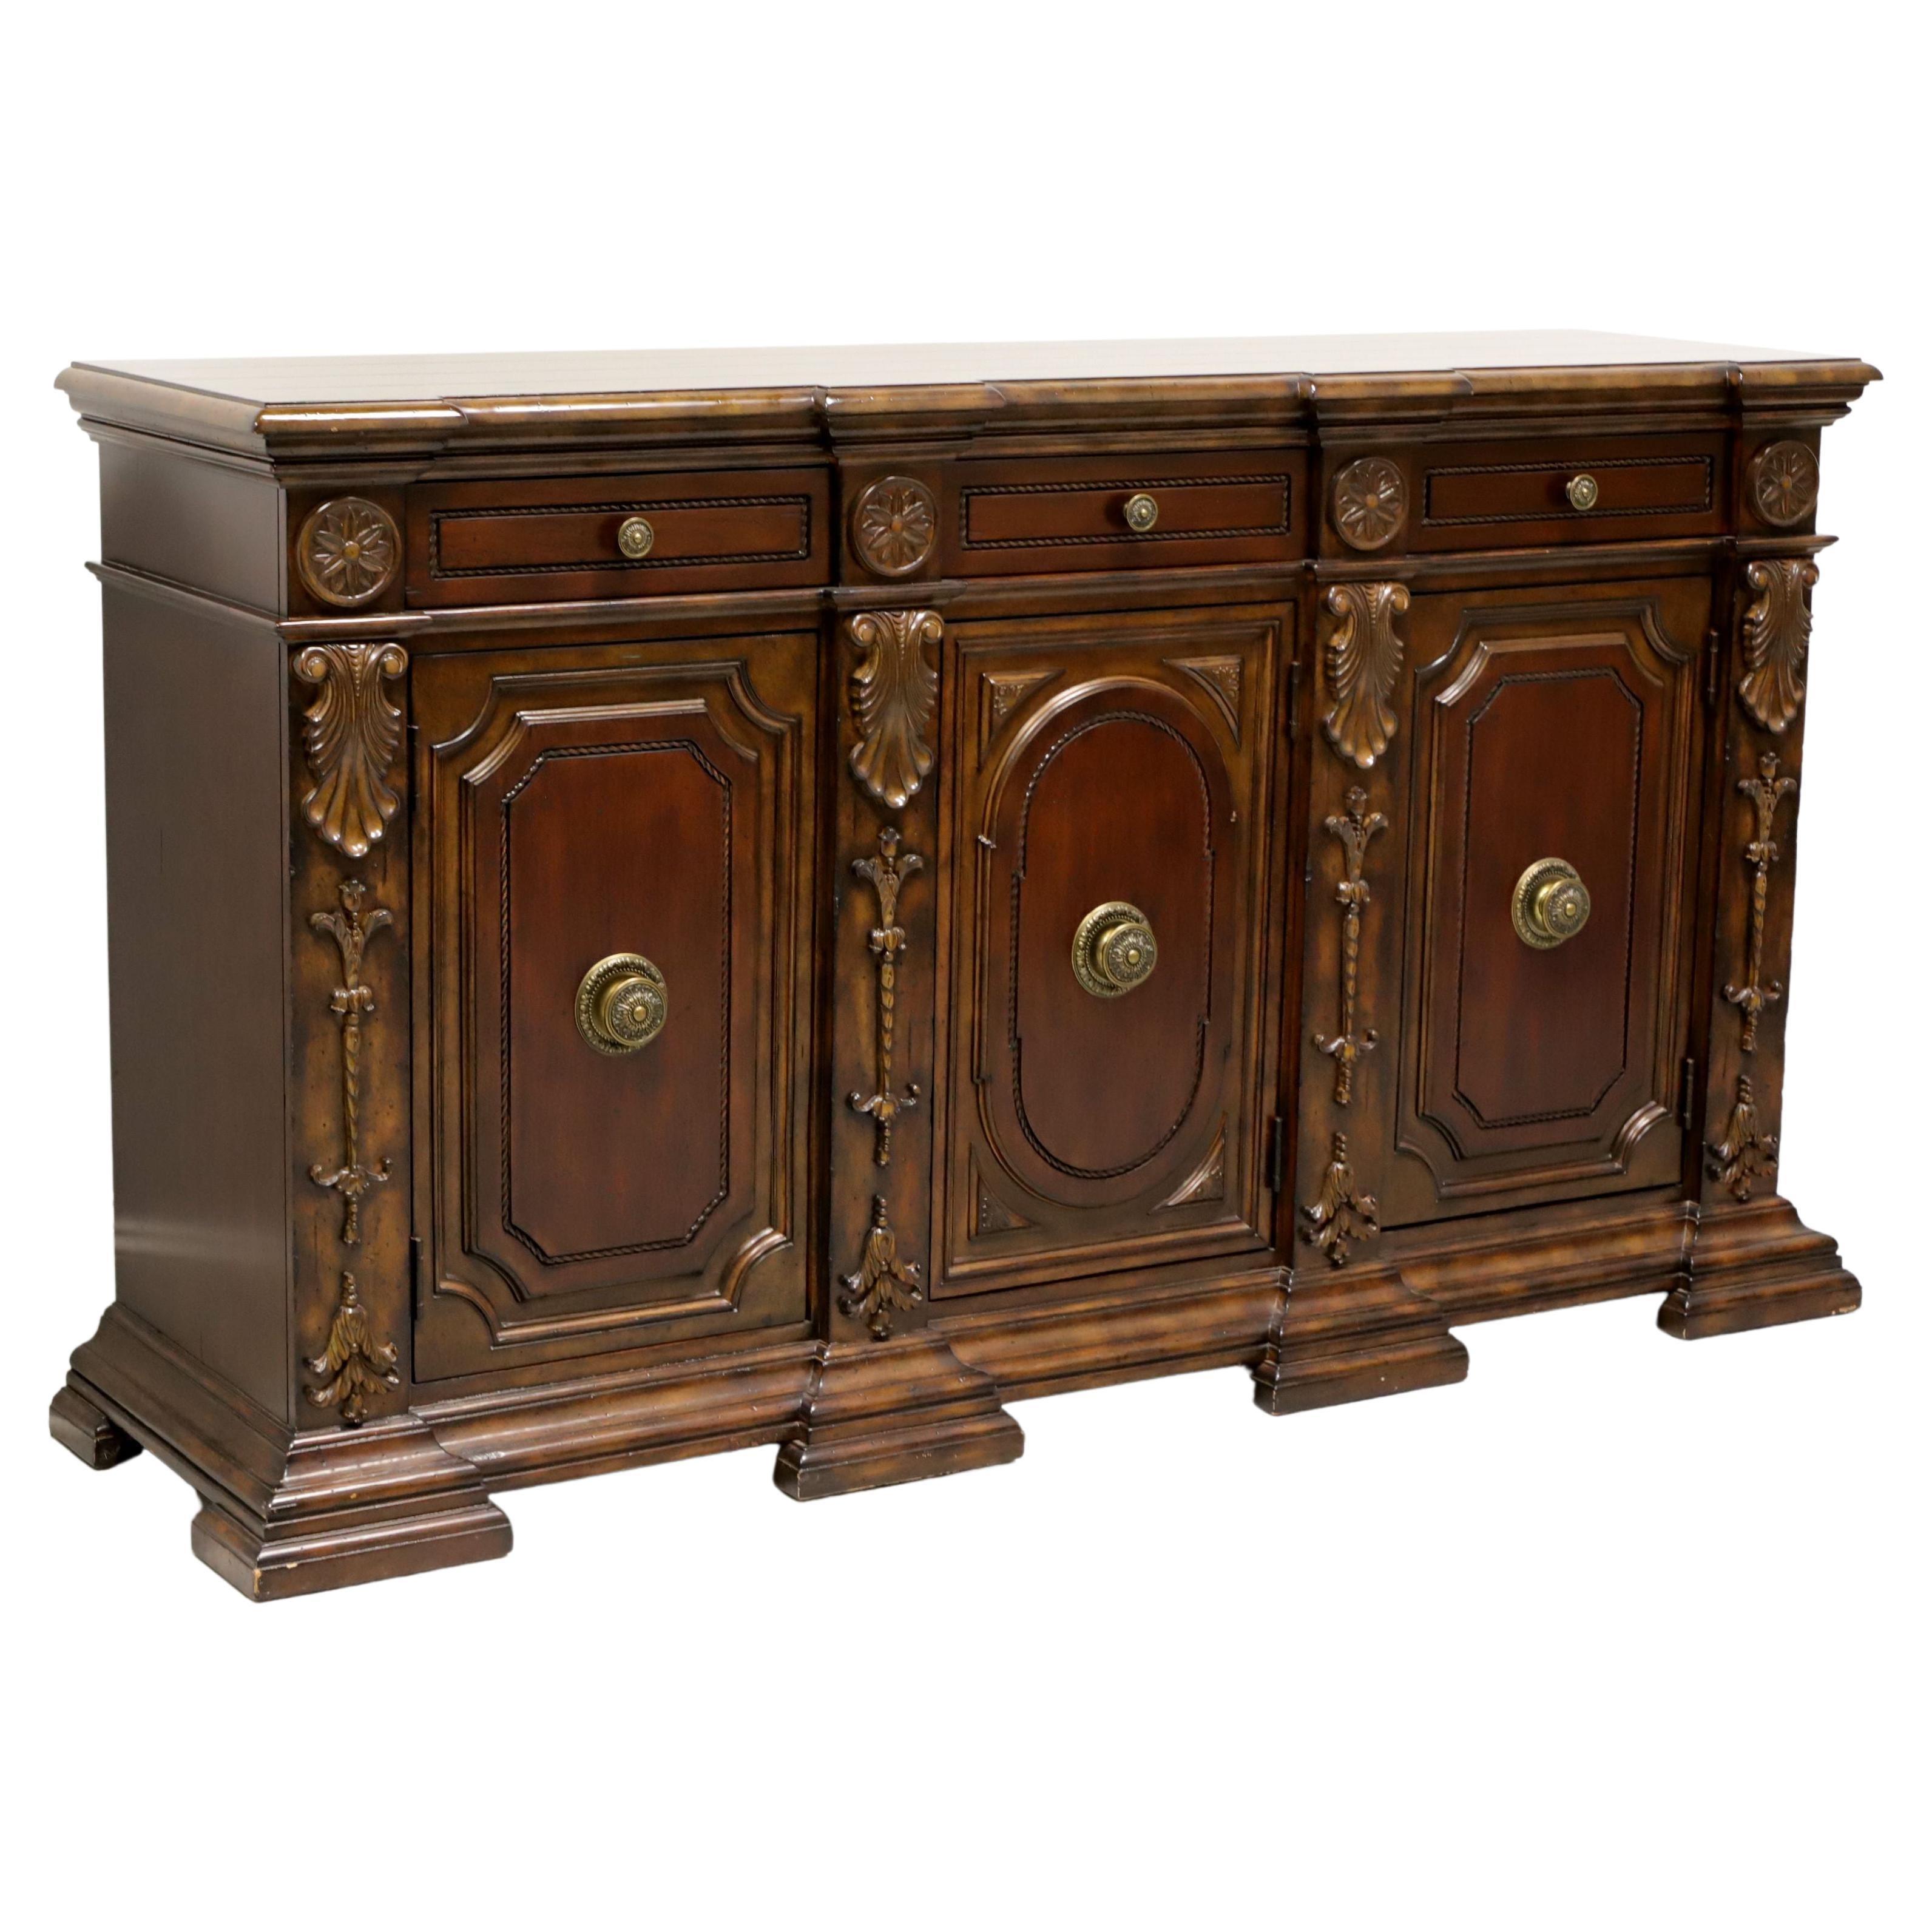 Monumental Transitional Style Carved Mahogany Buffet Credenza